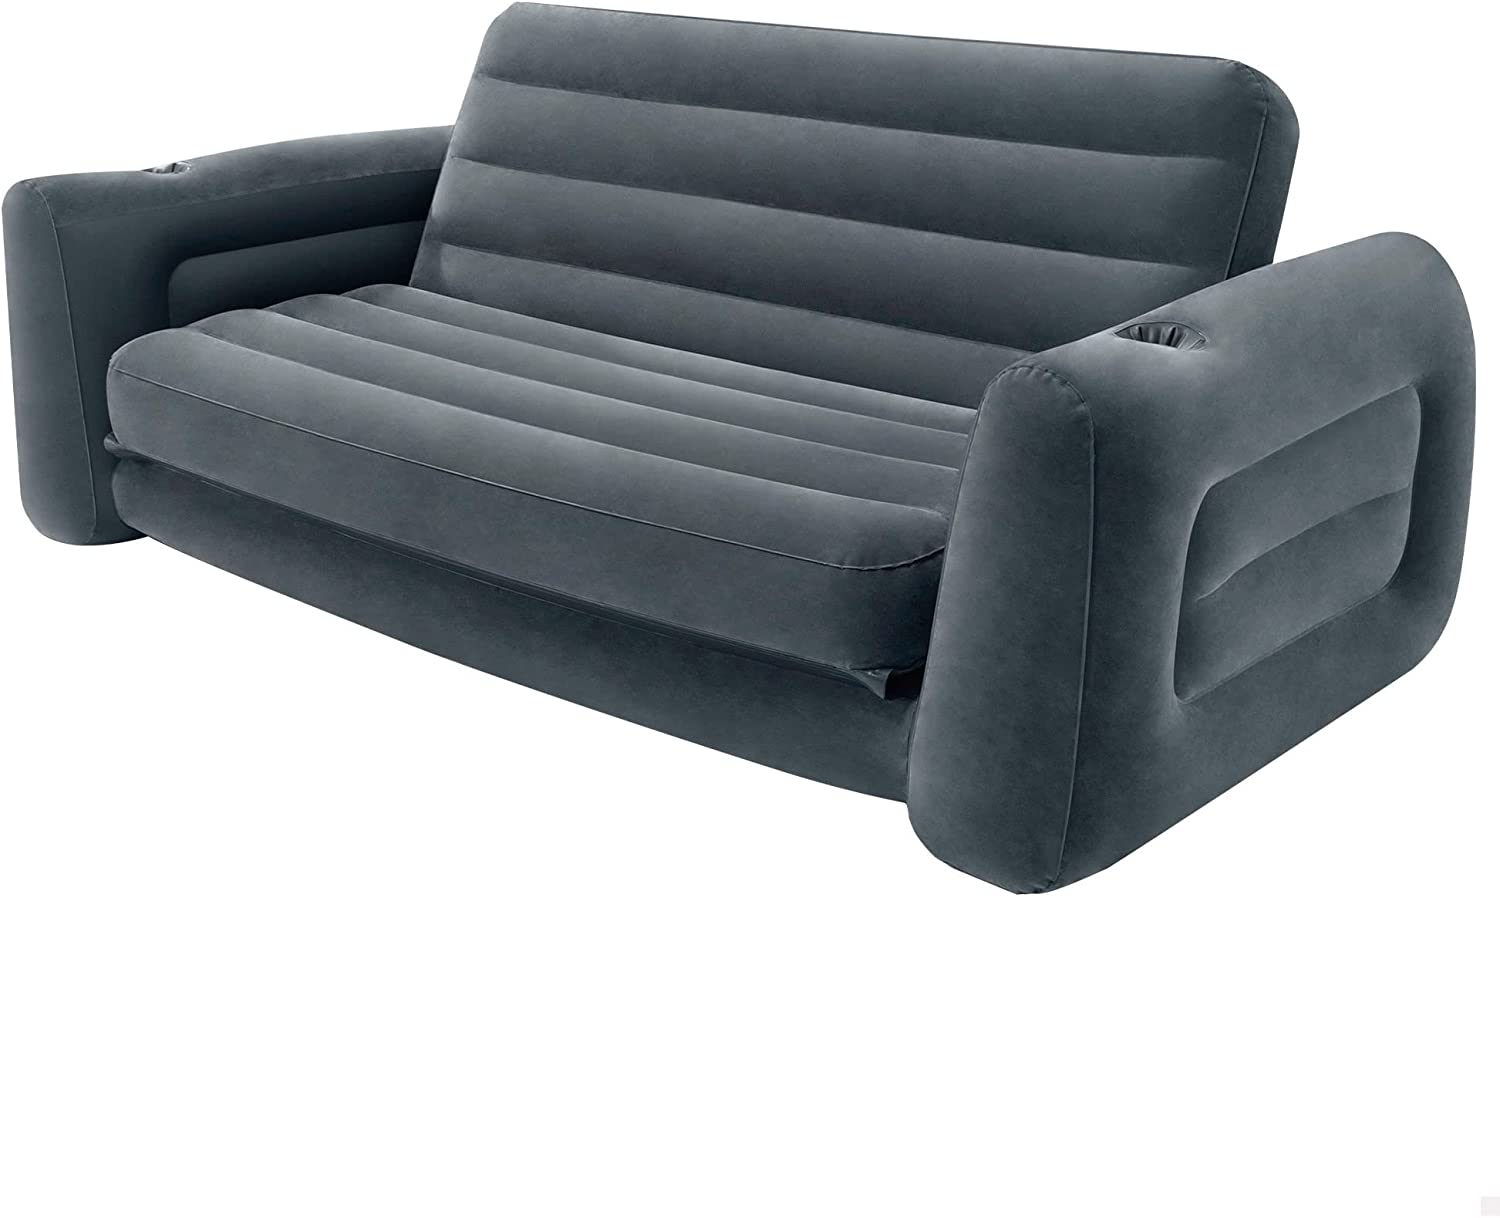 Intex Pull Out Inflatable Sofa